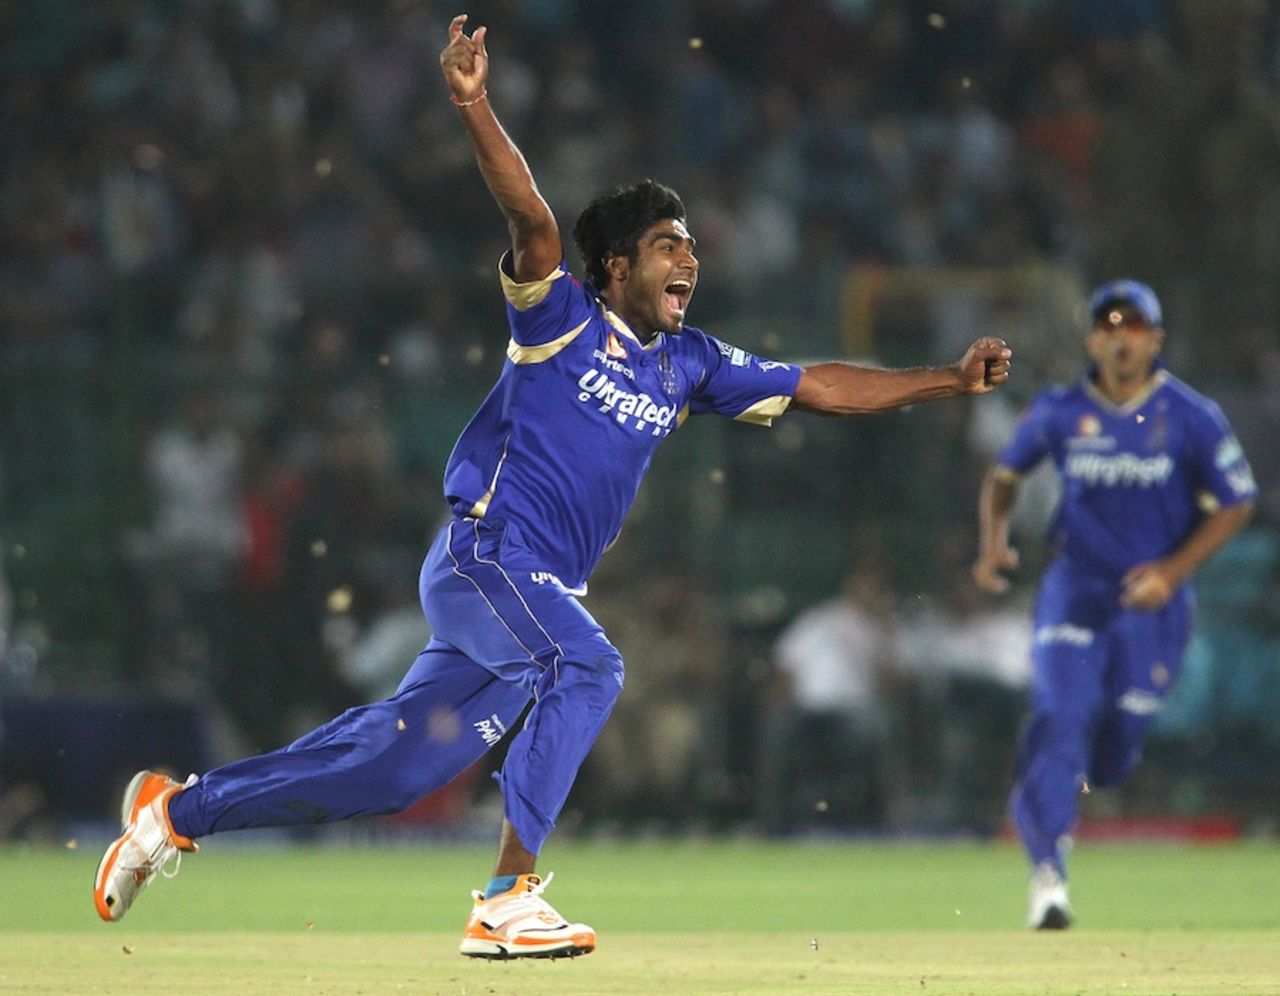 Rahul Shukla struck with two consecutive wickets in his first over, Rajasthan v Kolkata, IPL 2013, Jaipur, April 8, 2013